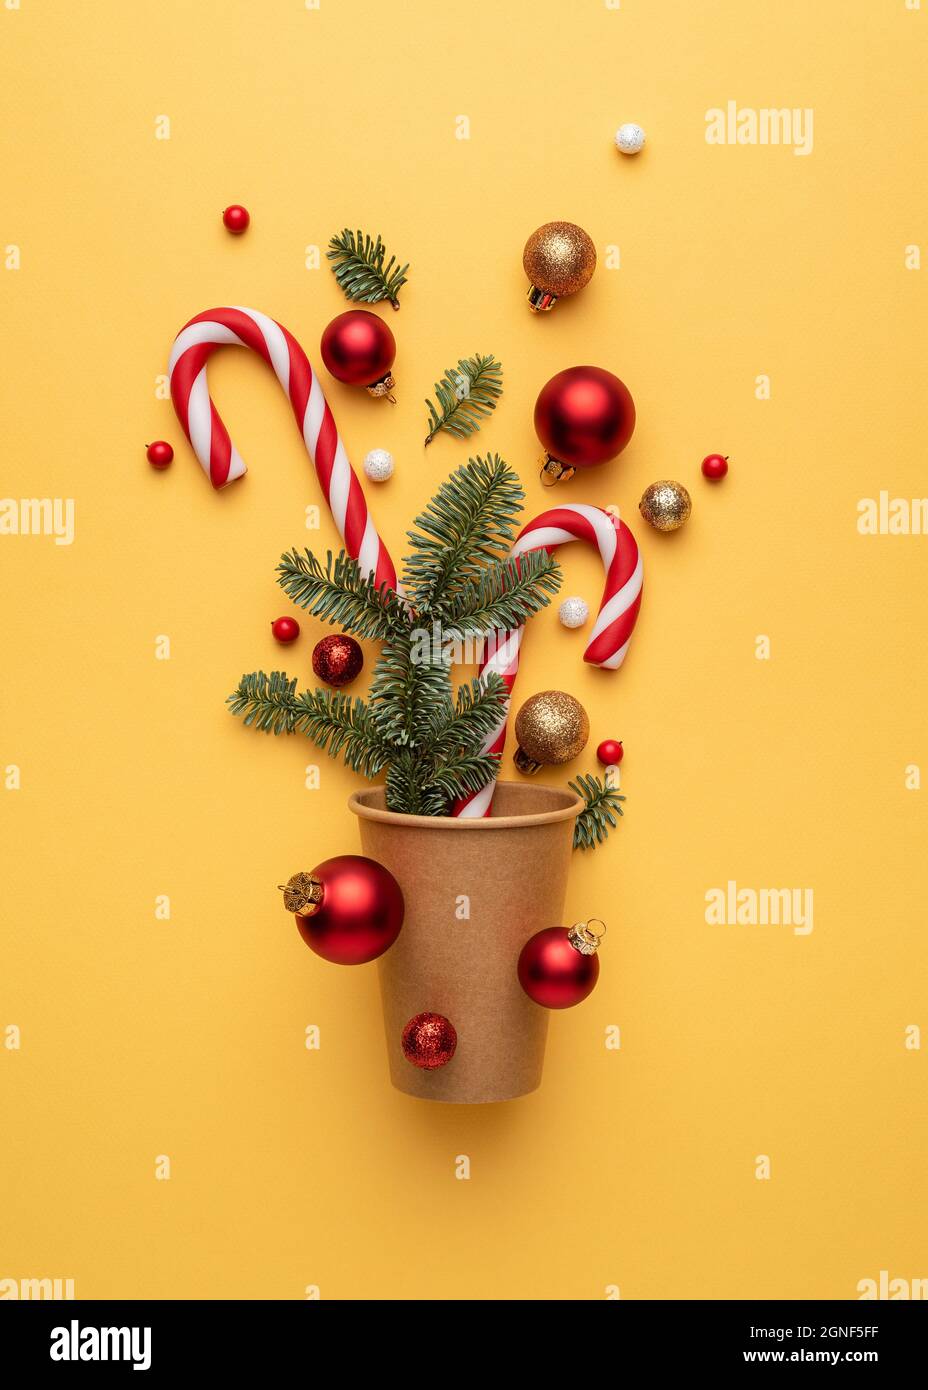 Christmas card with candy cane, Christmas balls, and fir tree branches on yellow background Stock Photo